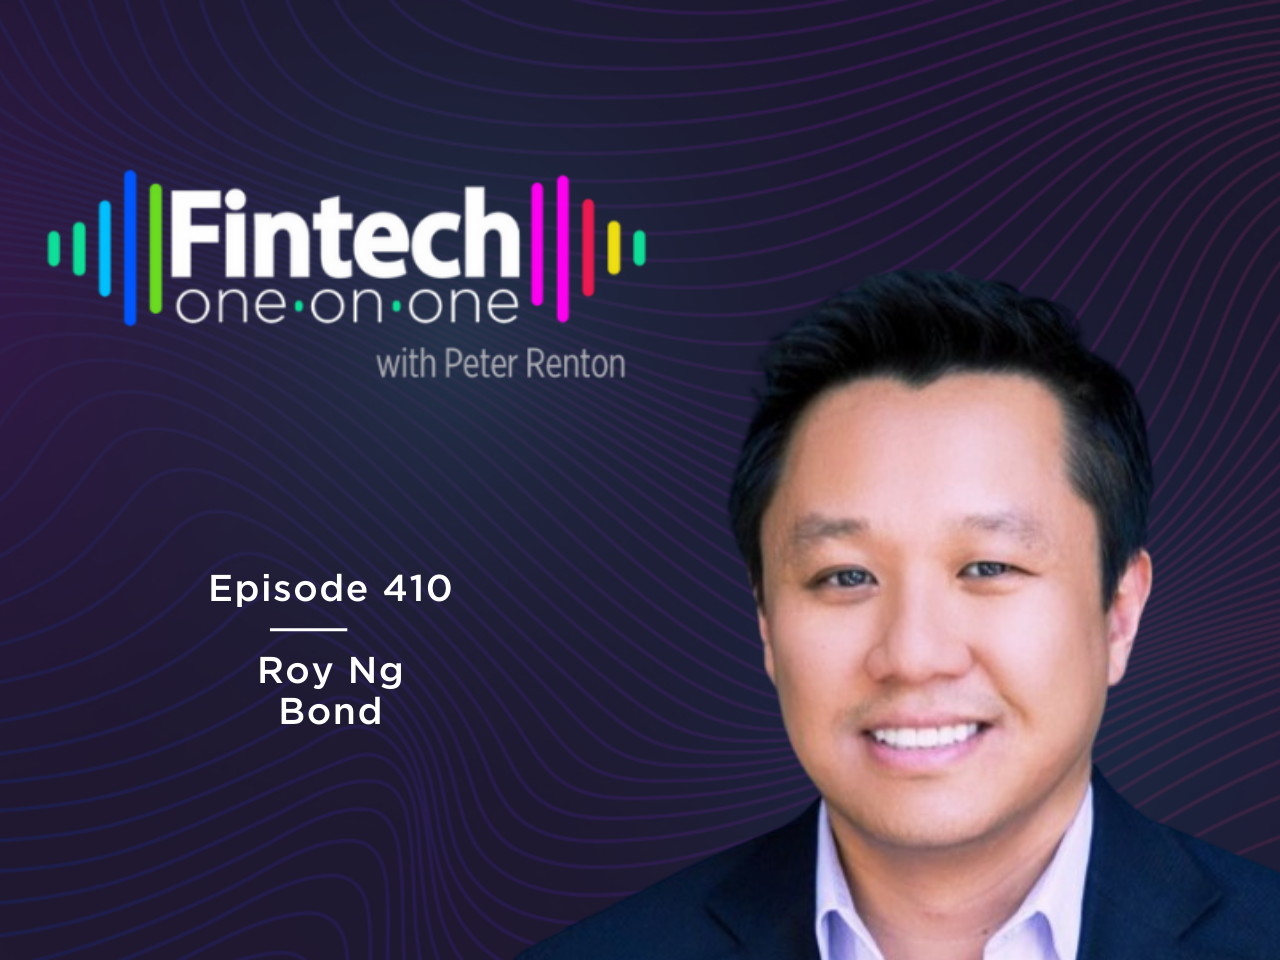 Roy Ng, Co-Founder & CEO of Bond